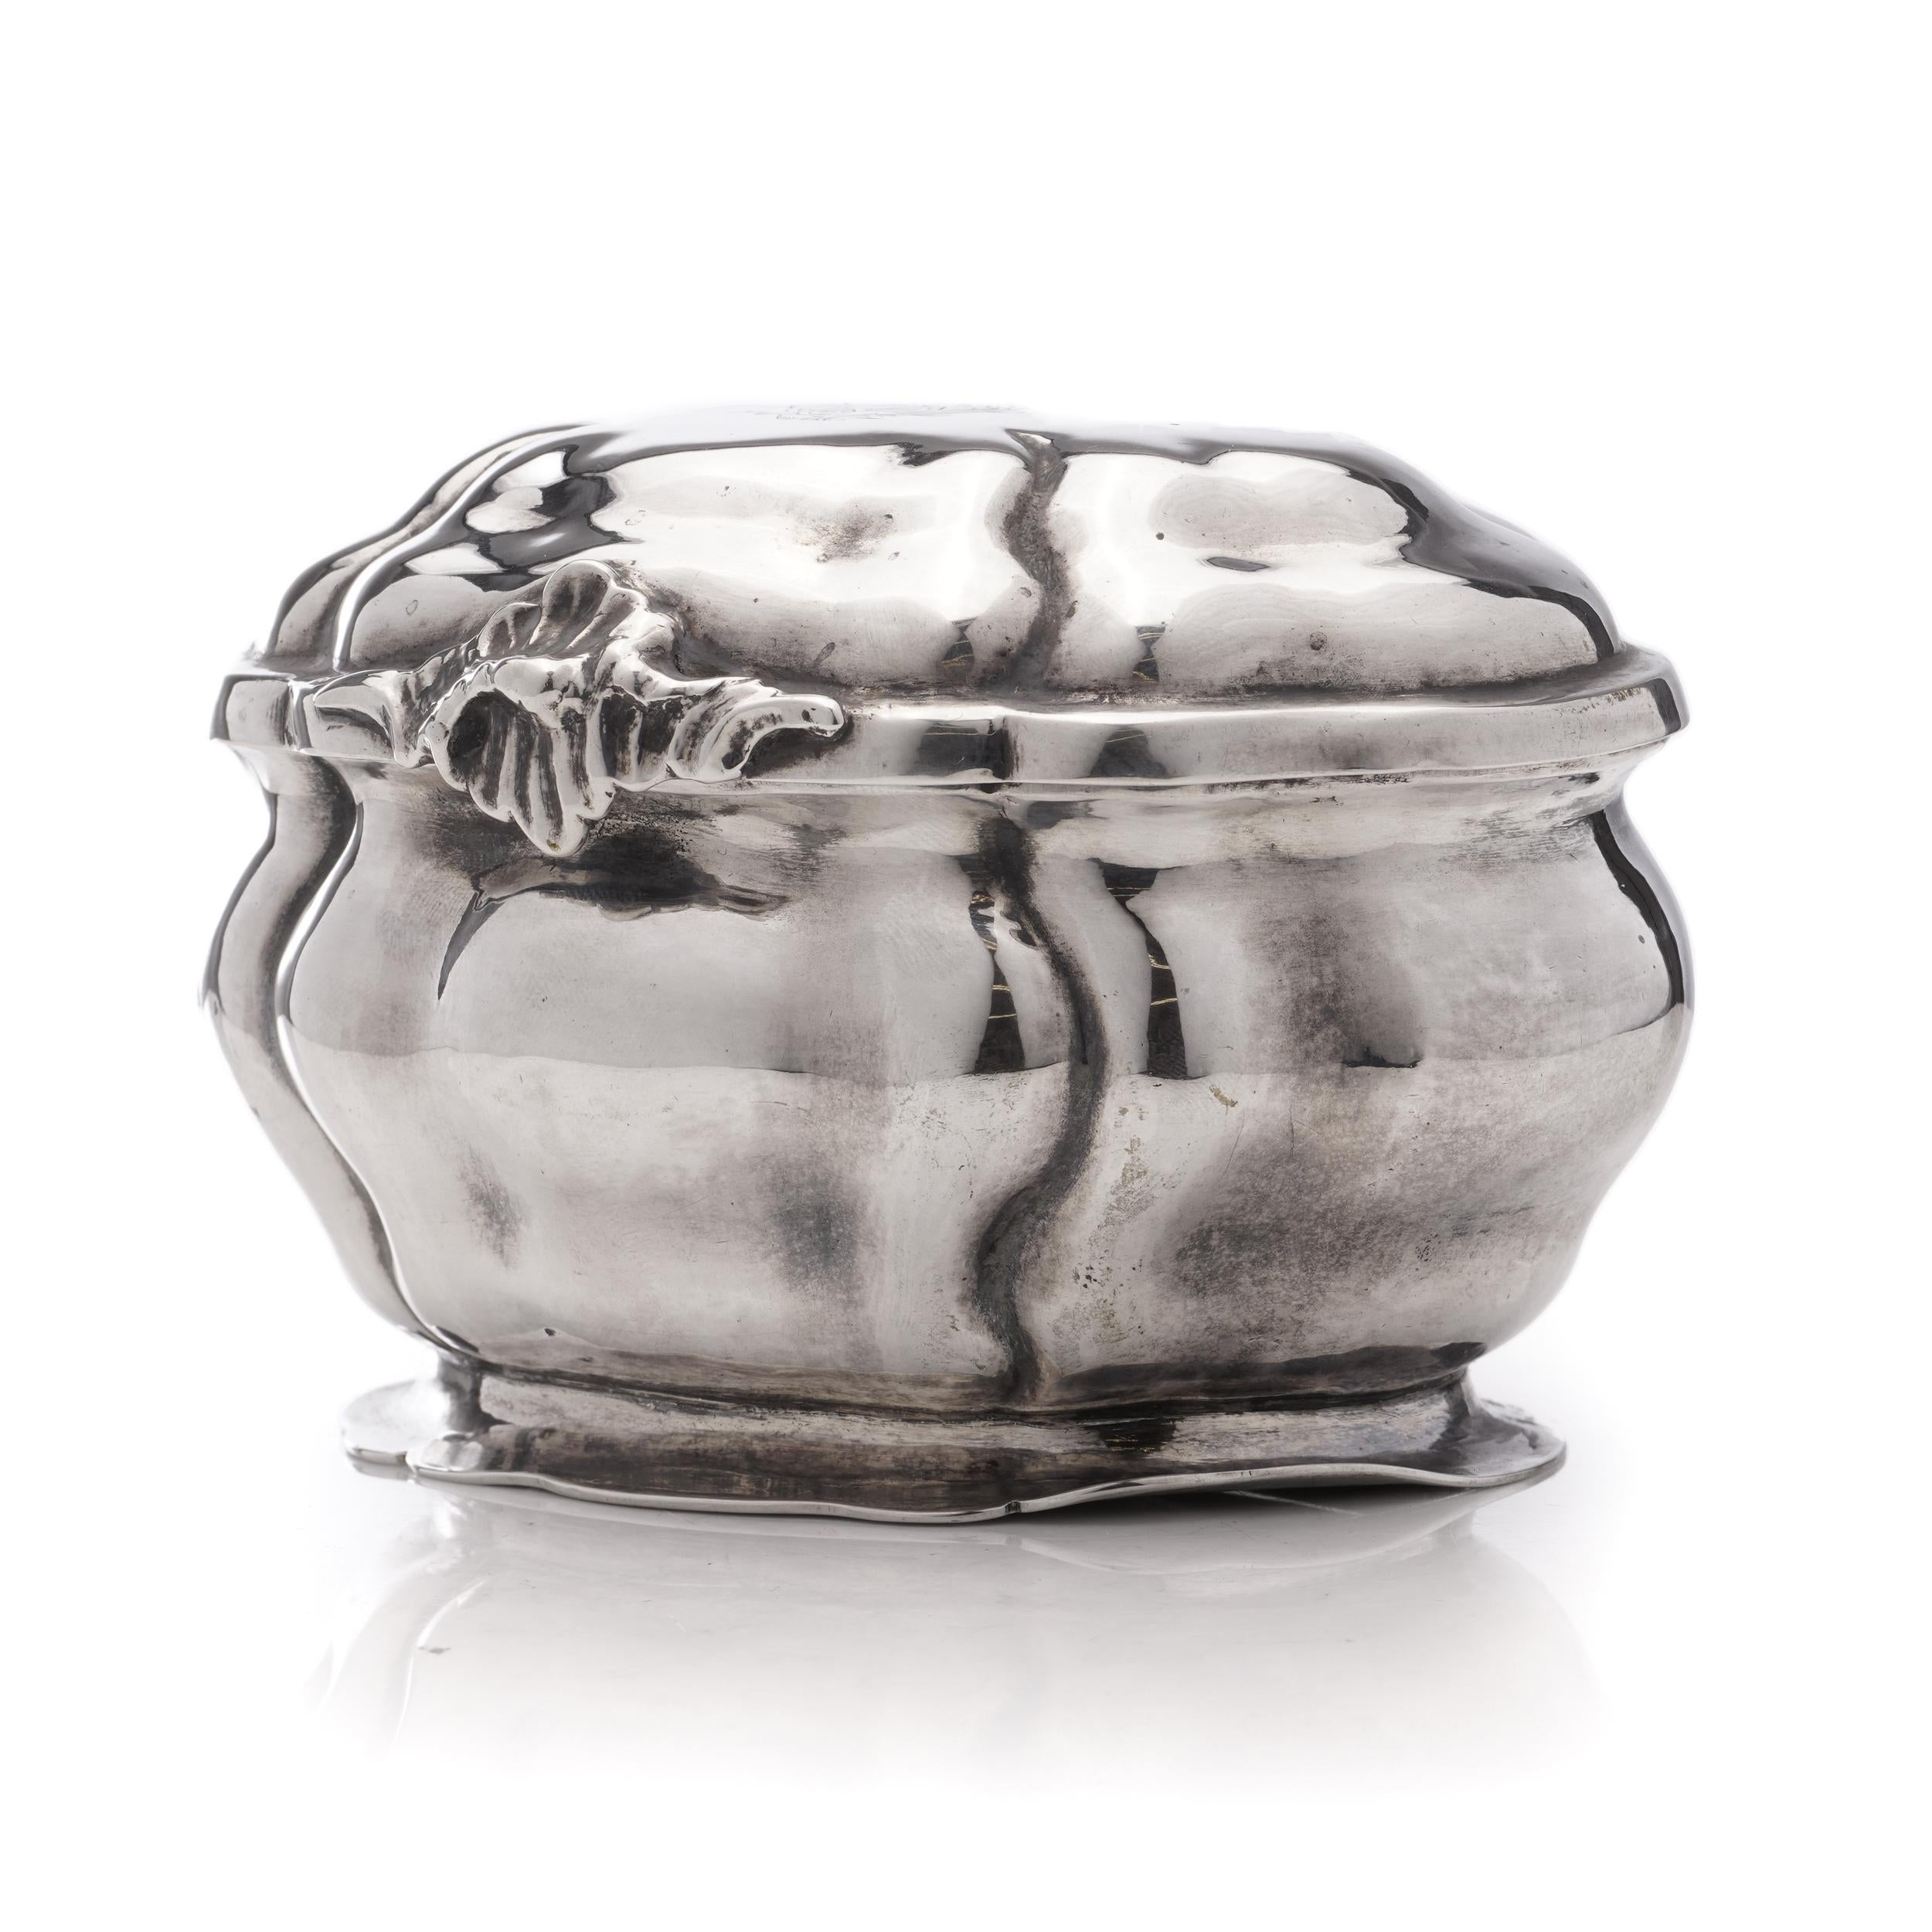 Antique 19th century 800. German silver small oval Tea Caddy with Hanau marks For Sale 2